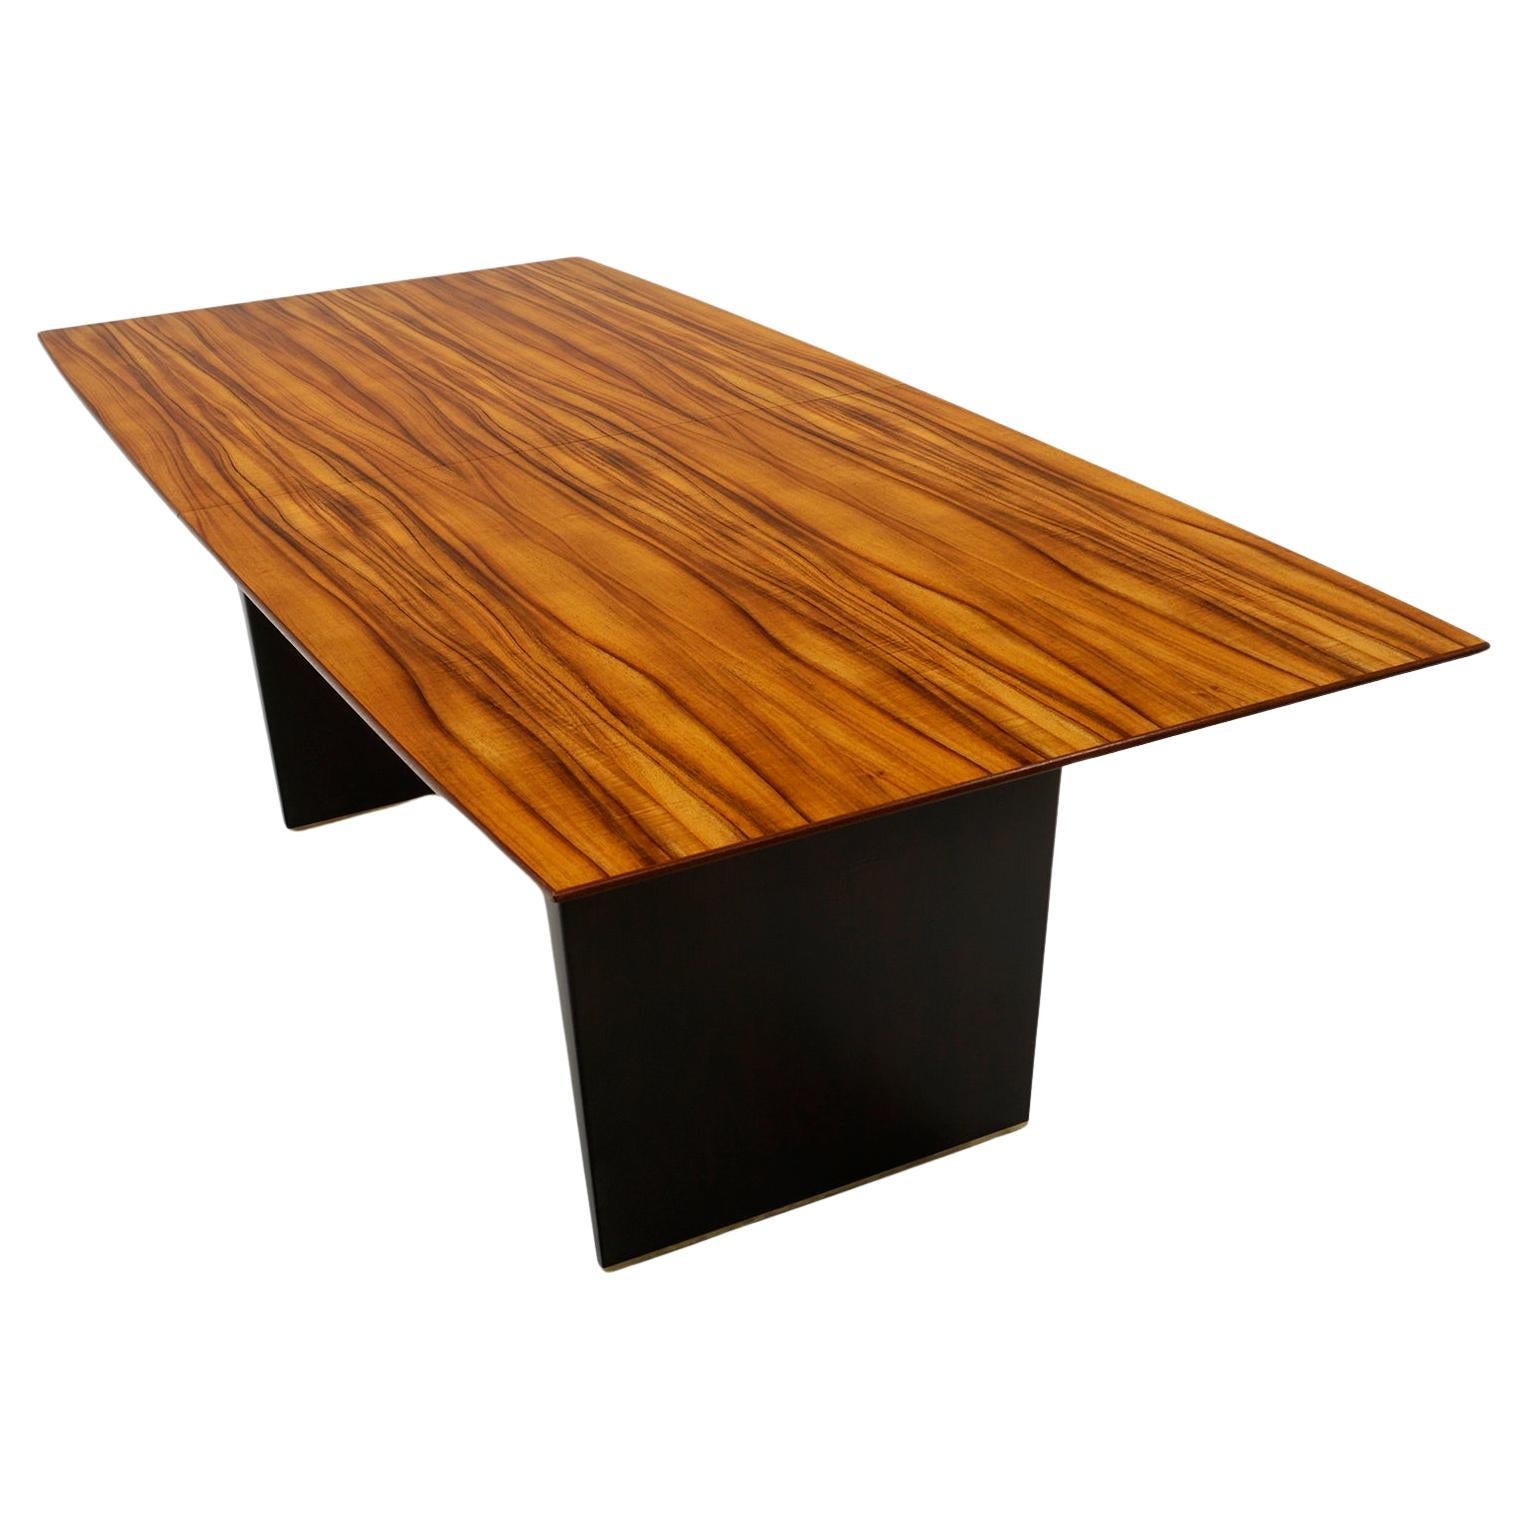 Tawi Wood Dining Table by Edward Wormley for Dunbar. Excellent. SEE THE VIDEO!